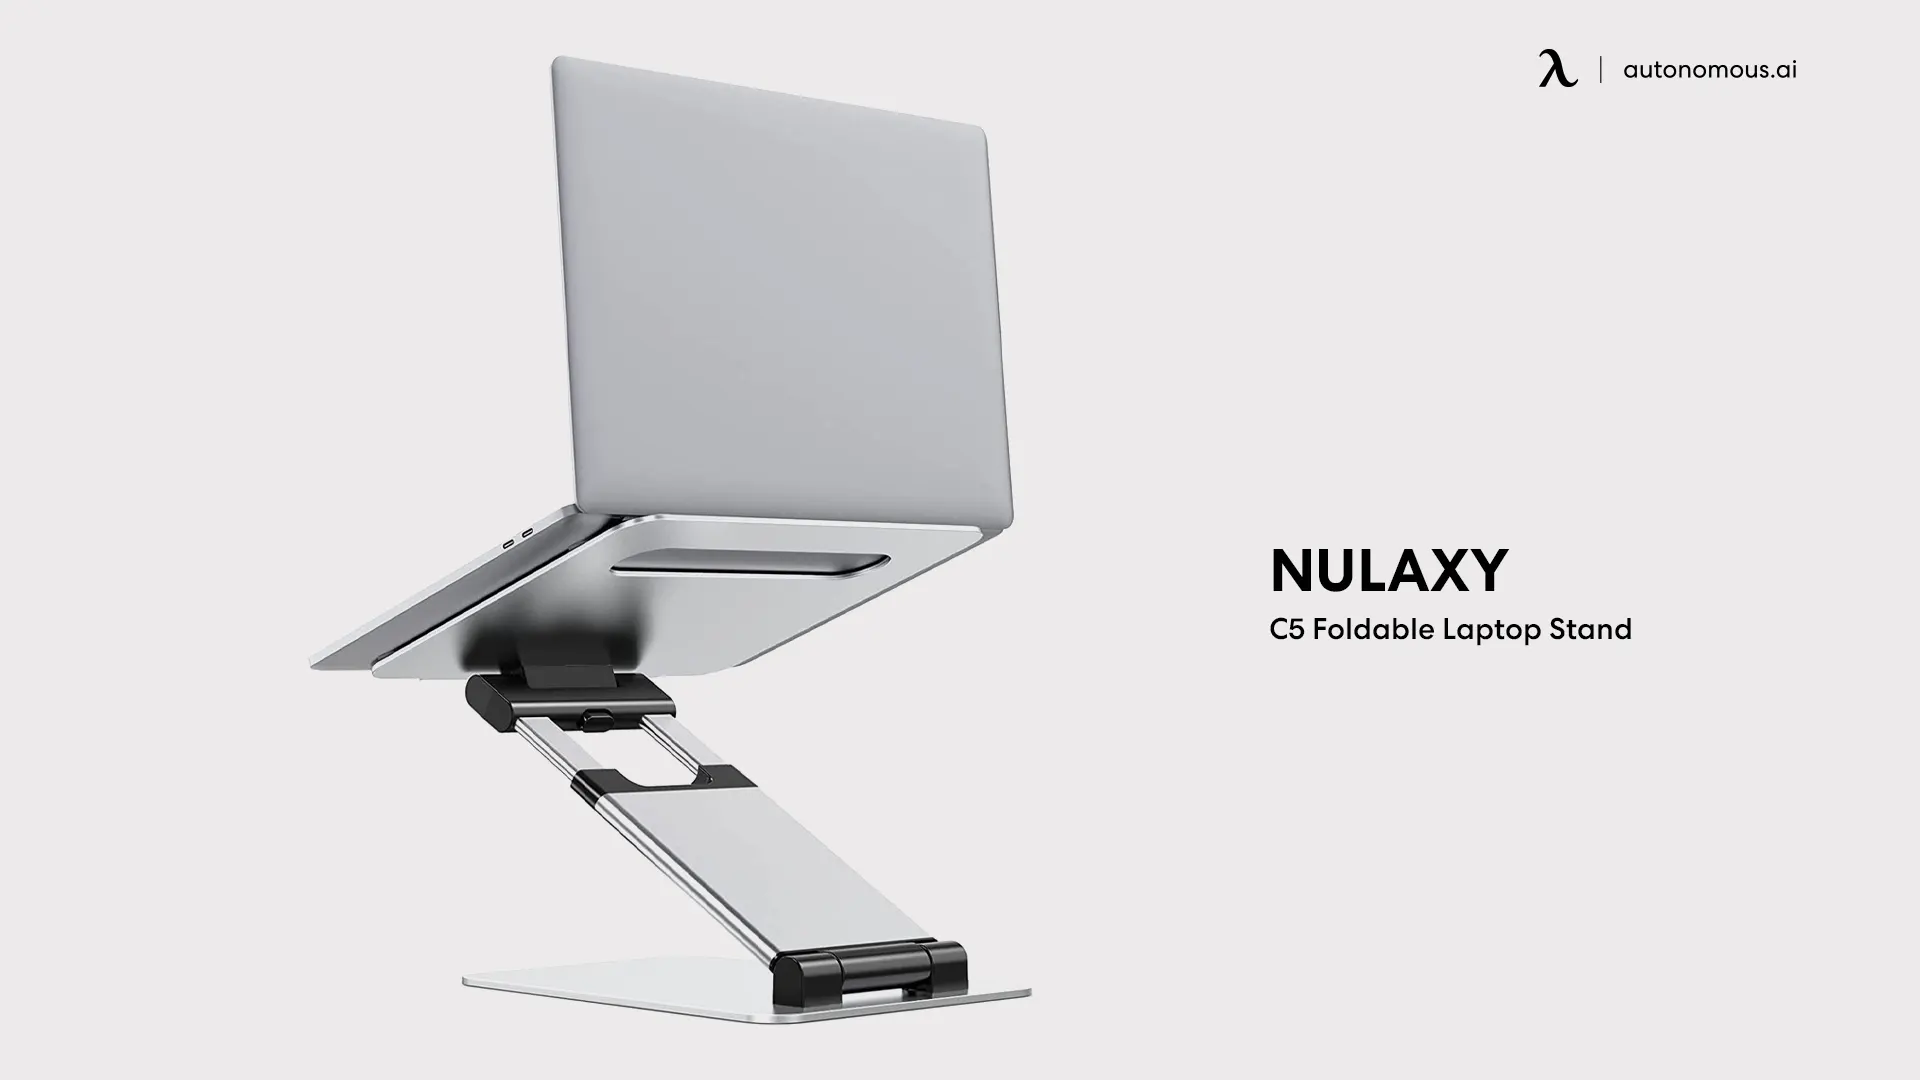 Nulaxy C5 Foldable Laptop Stand